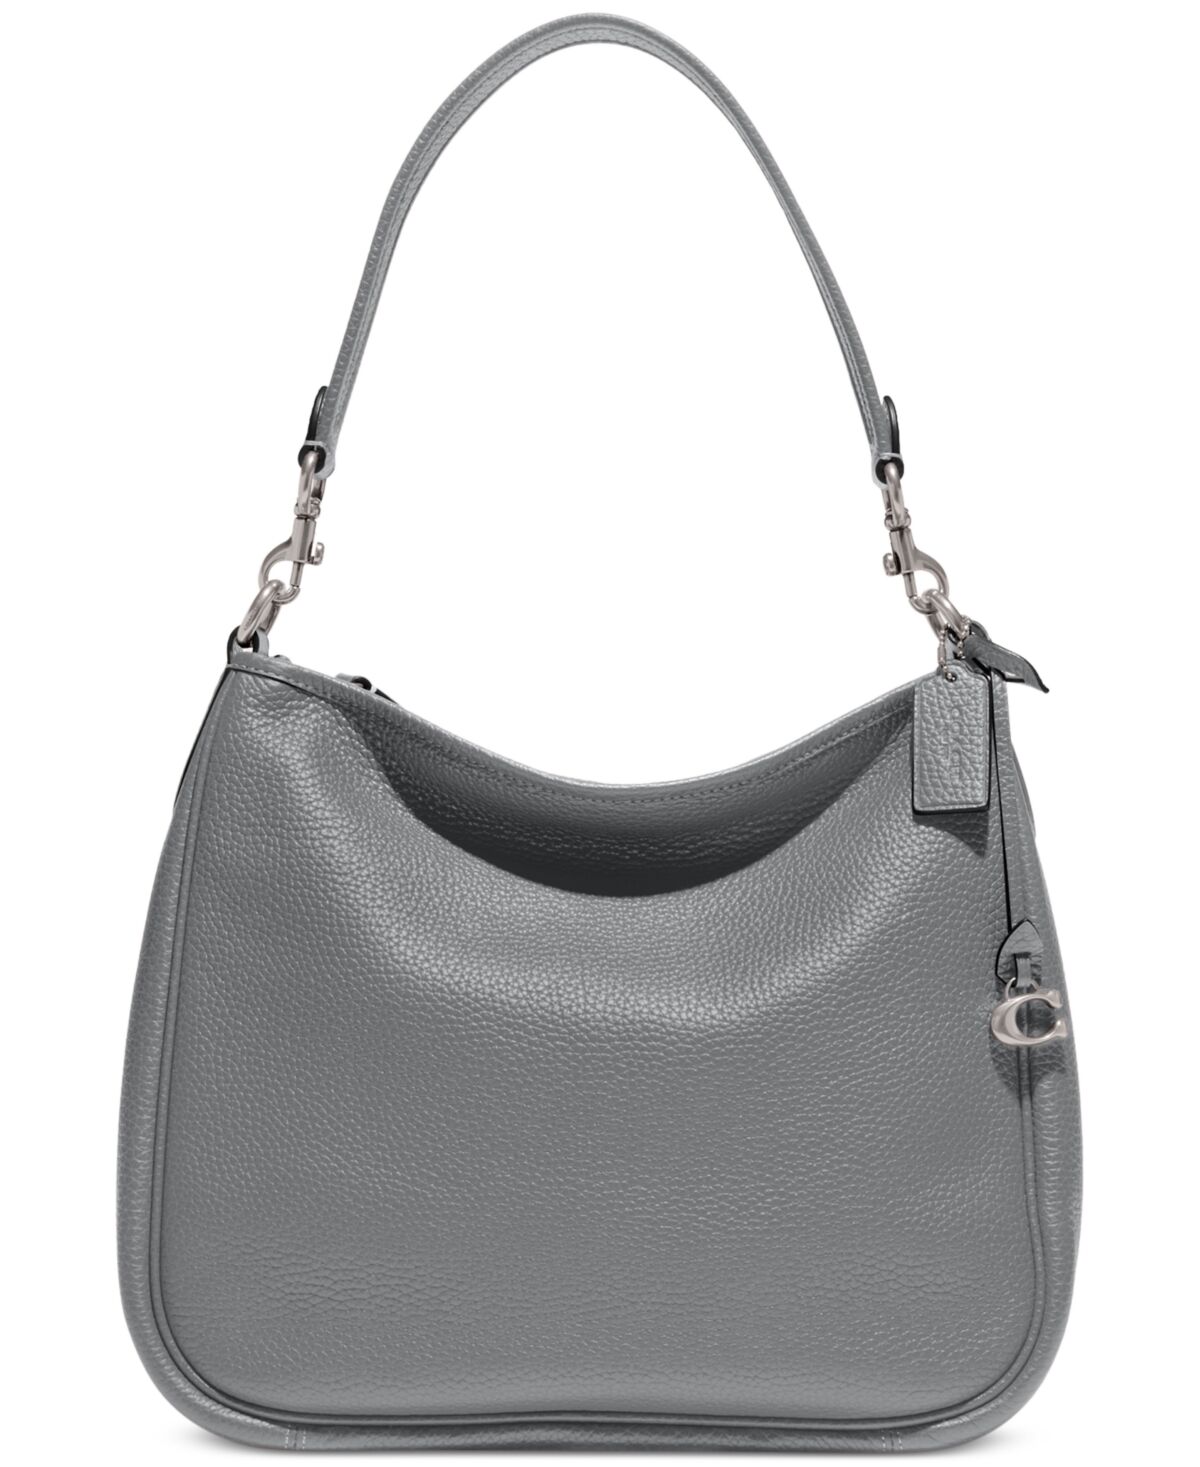 Coach Soft Pebble Leather Cary Shoulder Bag with Convertible Straps - Dark Gray